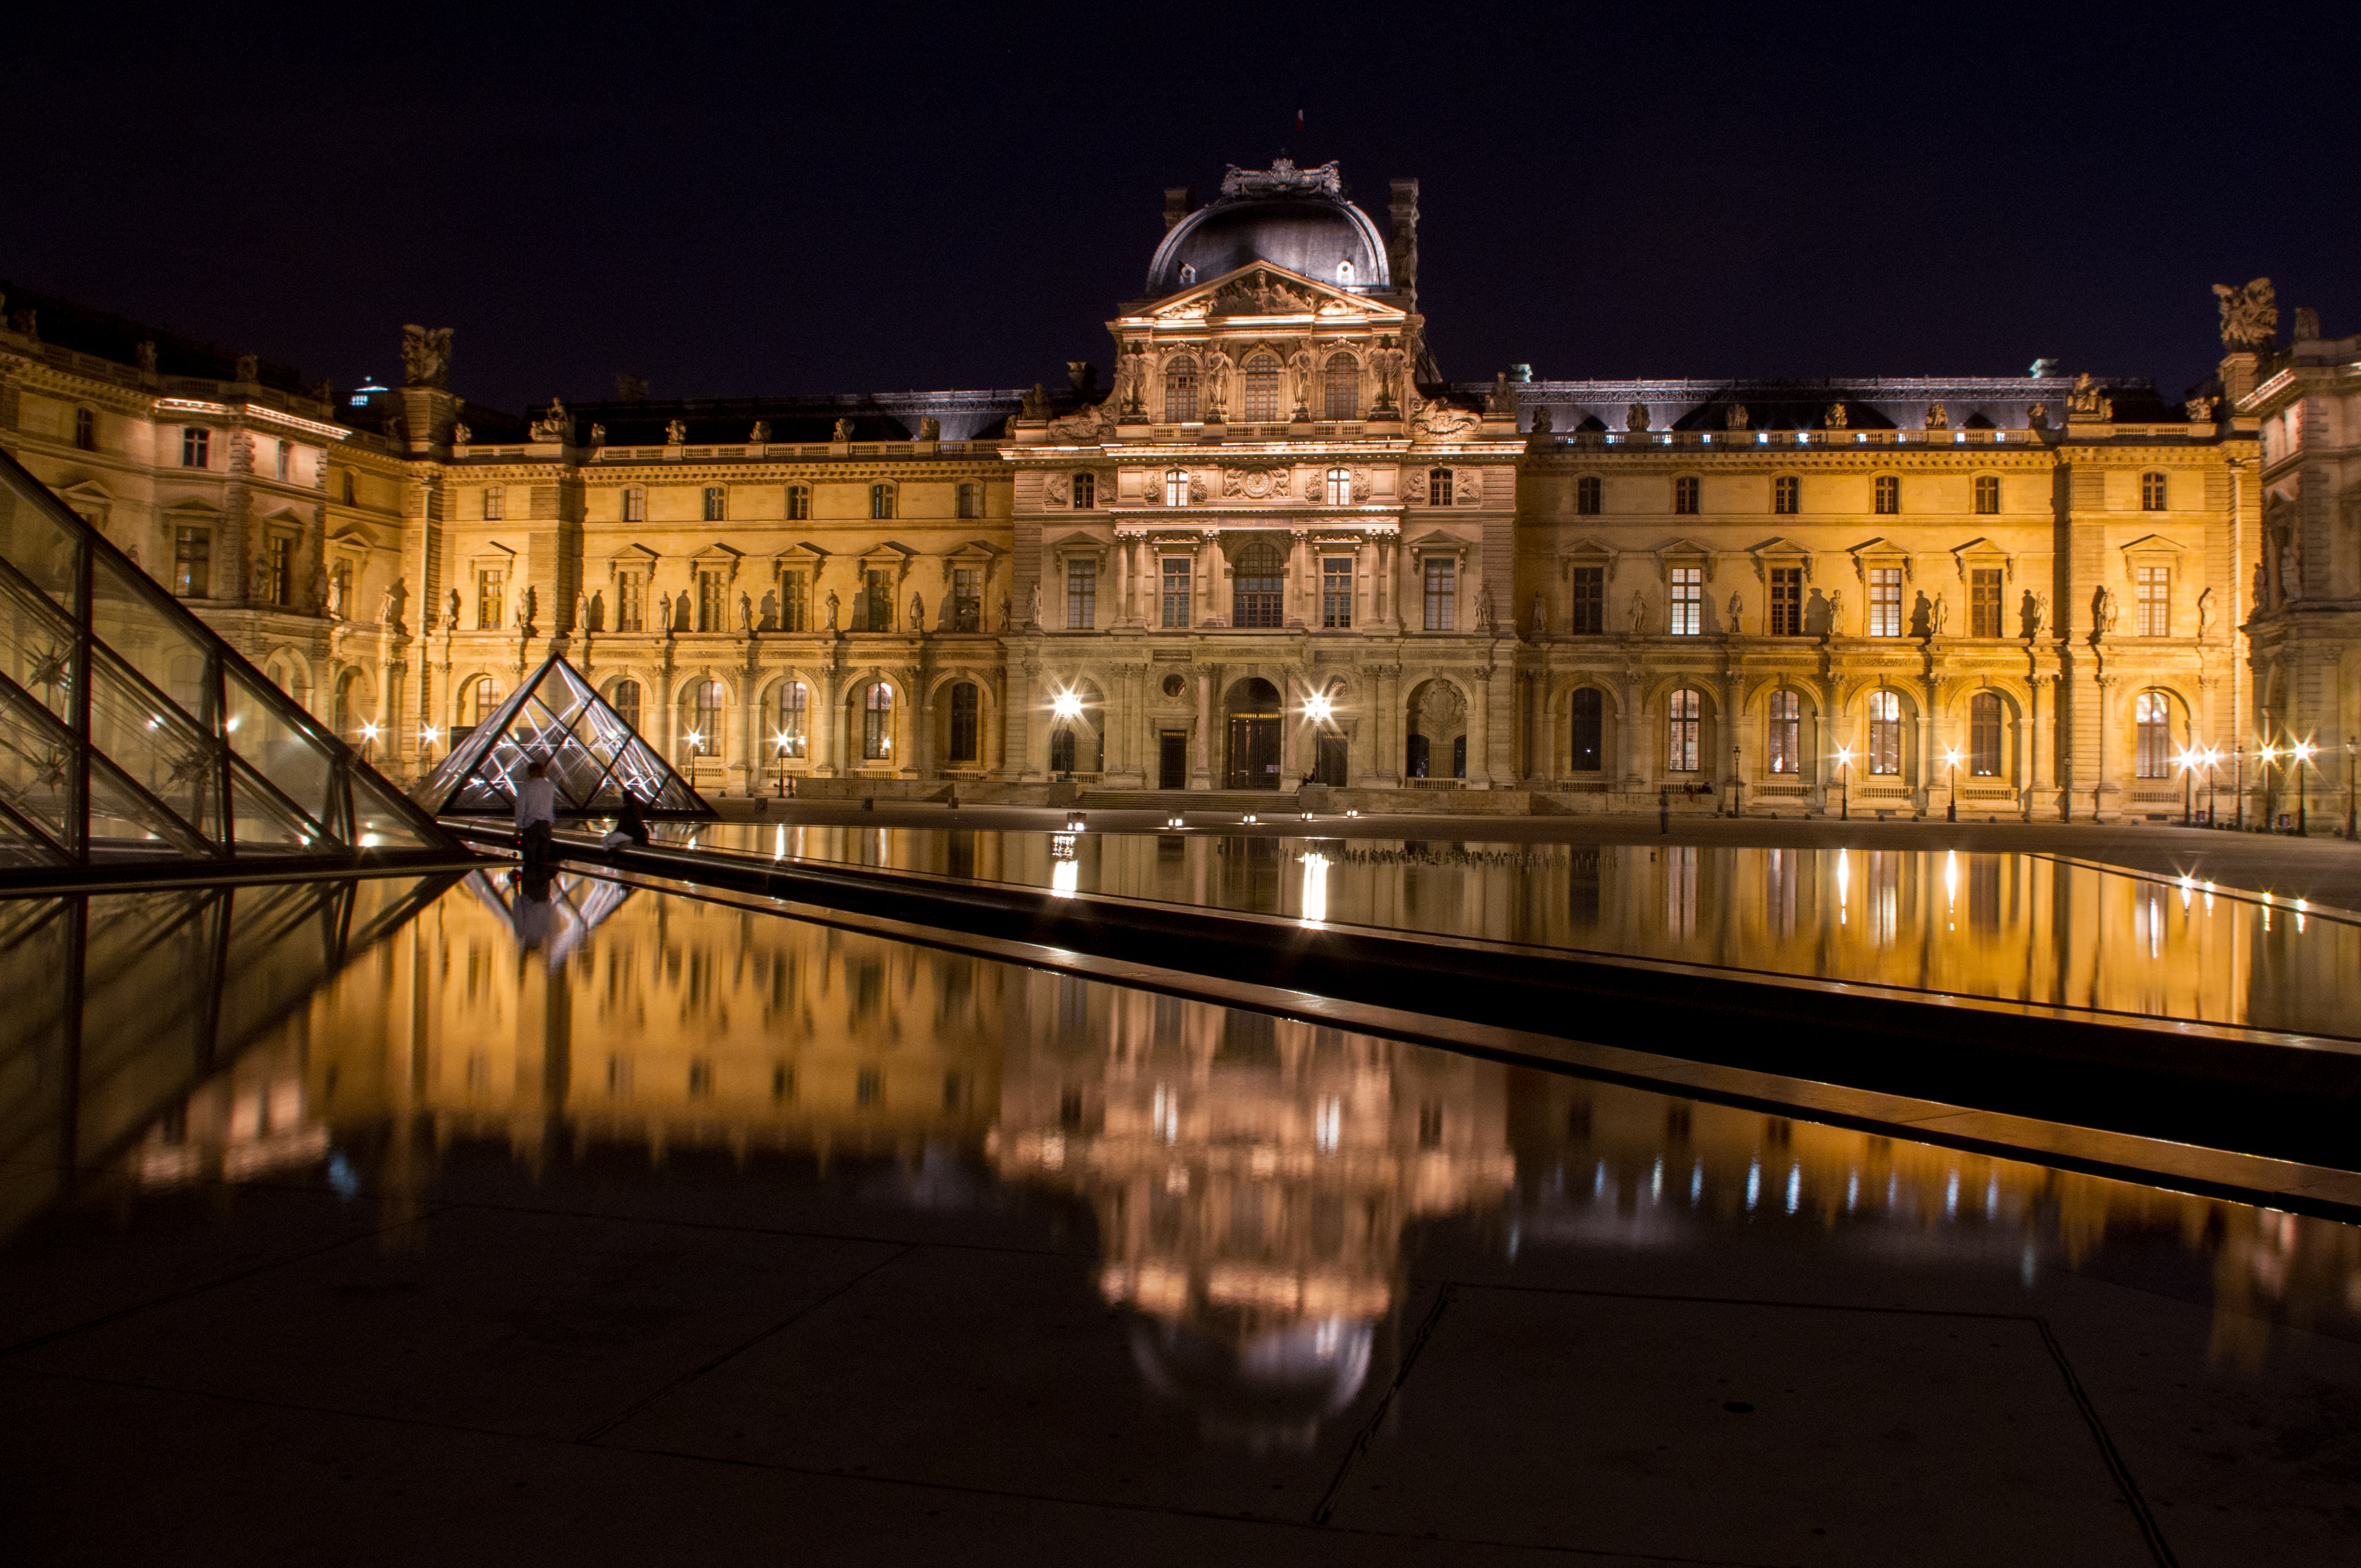 The Louvre in Paris, France shot at night with reflections from the pools